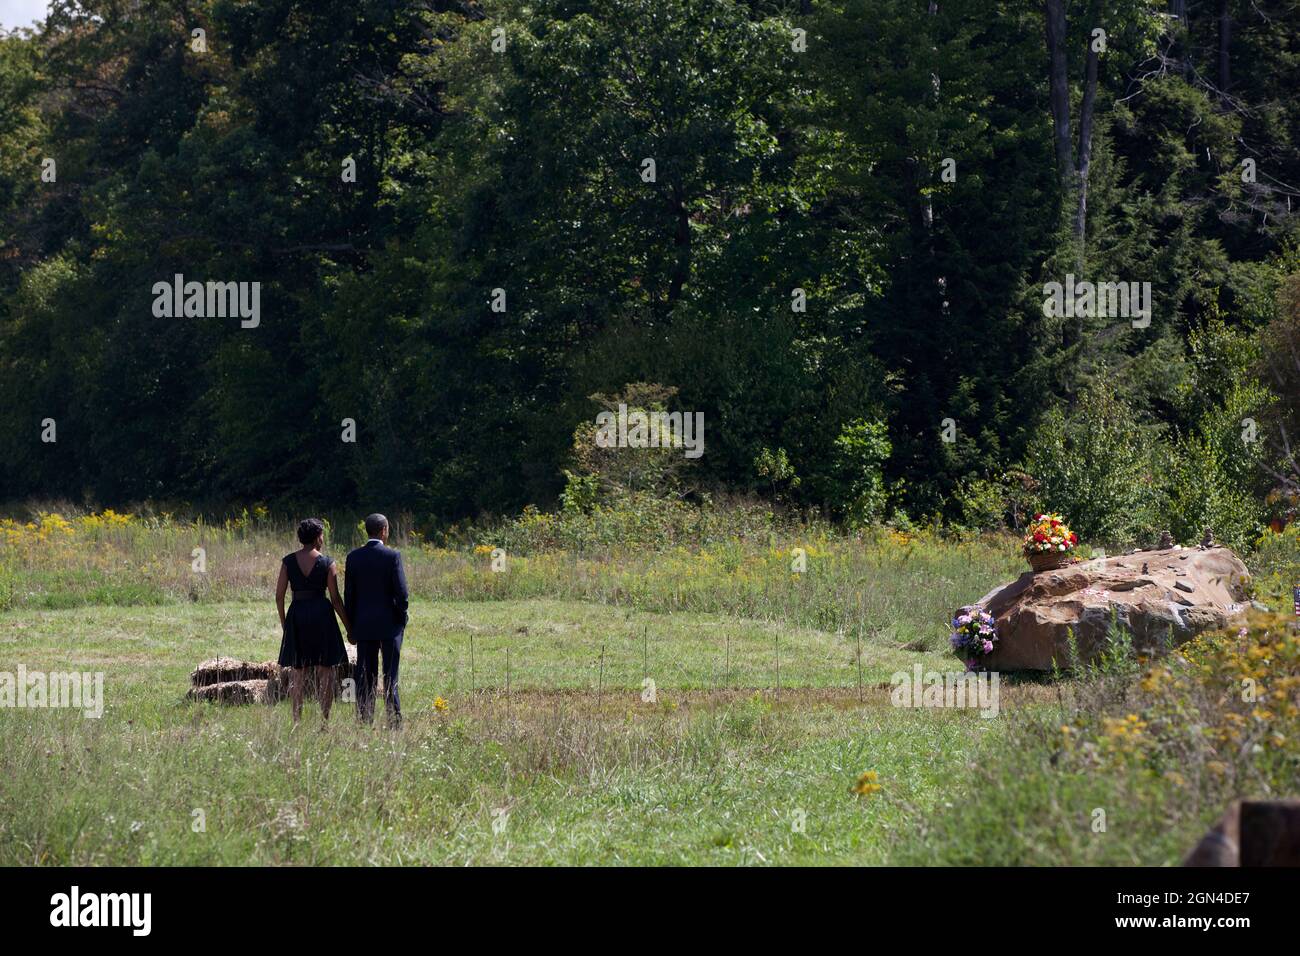 President Barack Obama and First Lady Michelle Obama visit the crash site following a ceremony at the Flight 93 National Memorial in Shanksville, Pa., on the tenth anniversary of the 9/11 attacks against the United States, Sunday, Sept. 11, 2011. (Official White House Photo by Pete Souza) This official White House photograph is being made available only for publication by news organizations and/or for personal use printing by the subject(s) of the photograph. The photograph may not be manipulated in any way and may not be used in commercial or political materials, advertisements, emails, produ Stock Photo